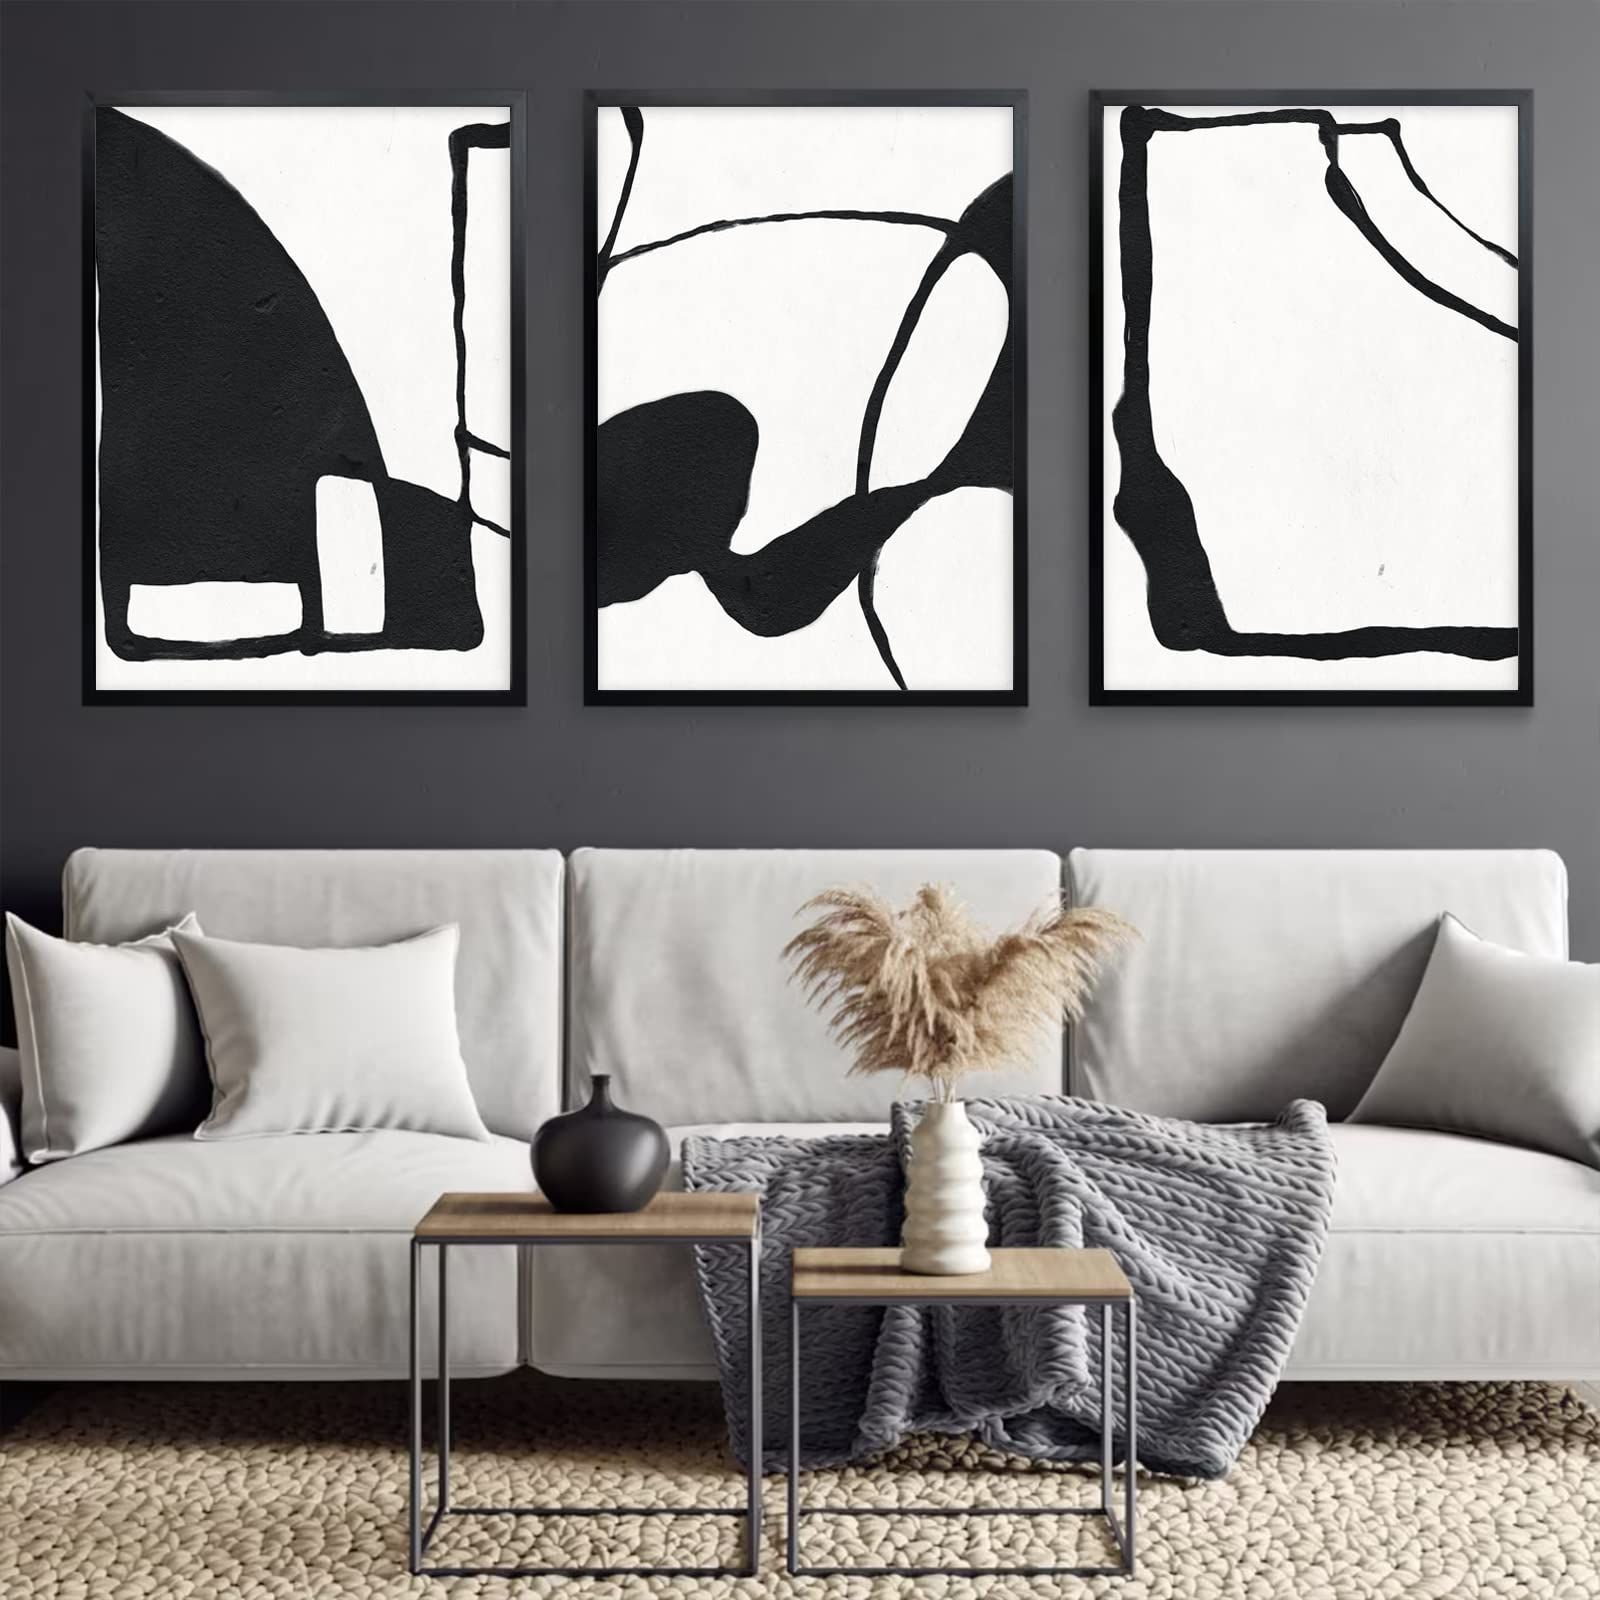 Widely Used Amazon: Joocrise Black And White Wall Art Modern Abstract Canvas Wall  Art Black And White Artwork For Walls Minimalist Black And White Geometric  Painting For Living Room Bedroom Decor 16x24x3 Inch Unframed: Intended For Black Minimalist Wall Art (Photo 10 of 15)